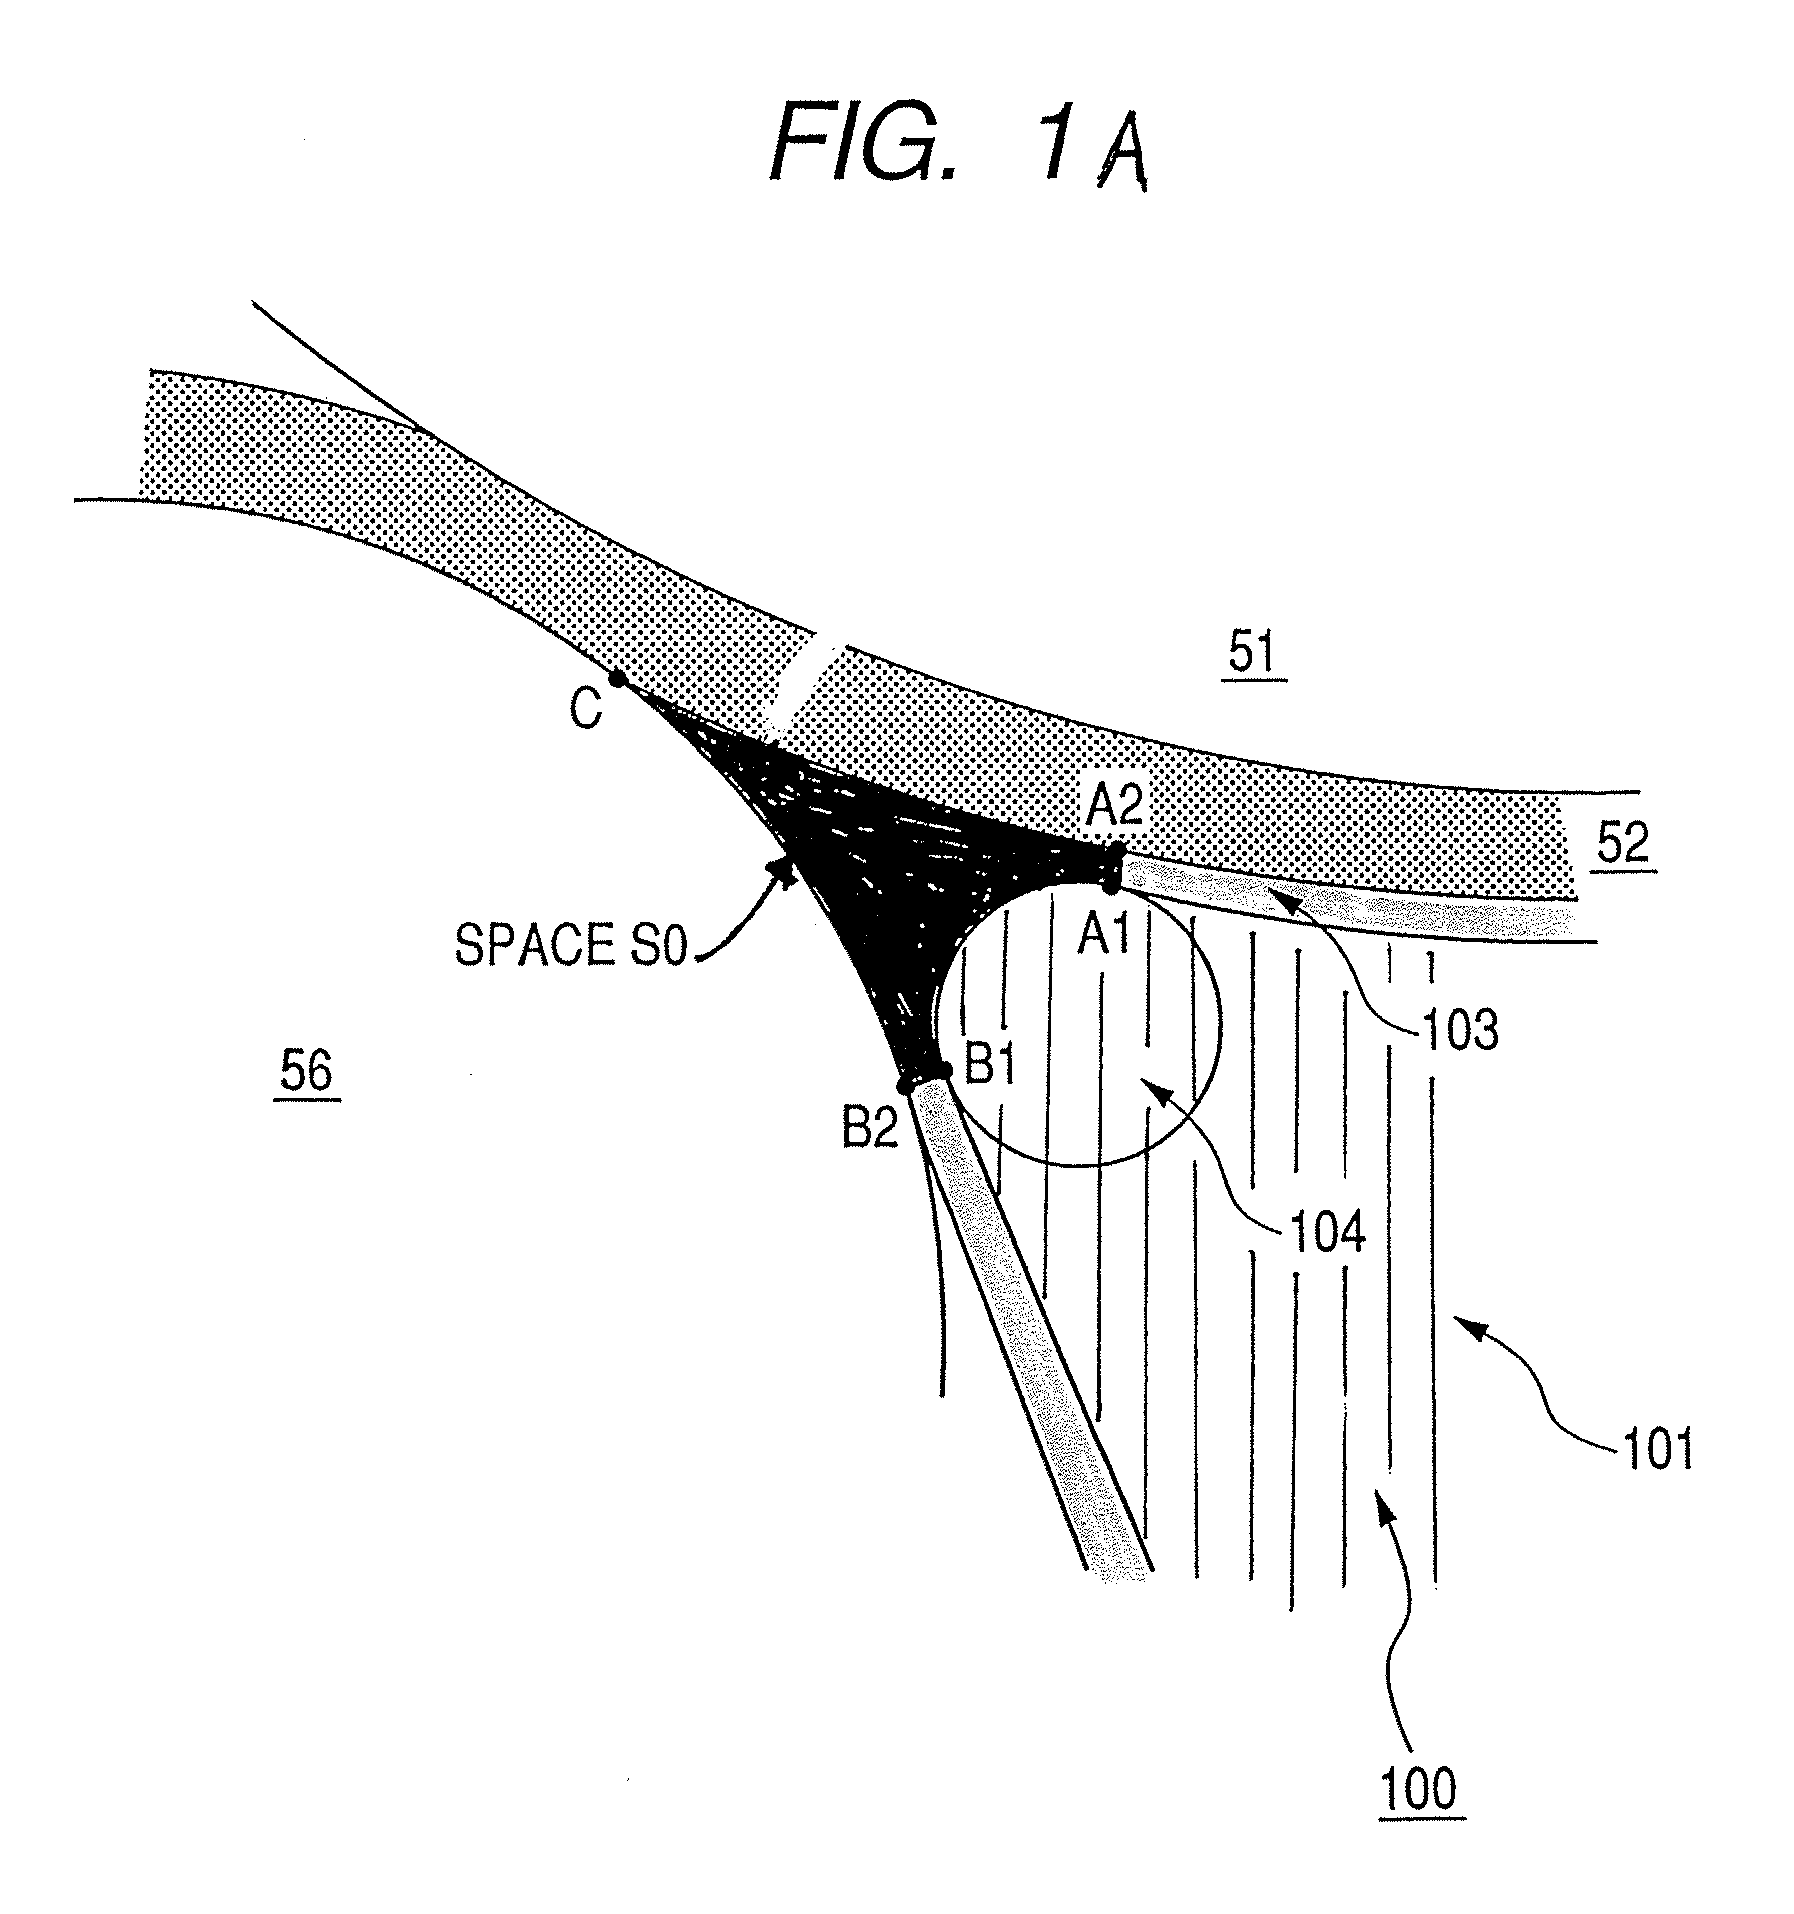 Image heating apparatus with heating nip for preventing image failure